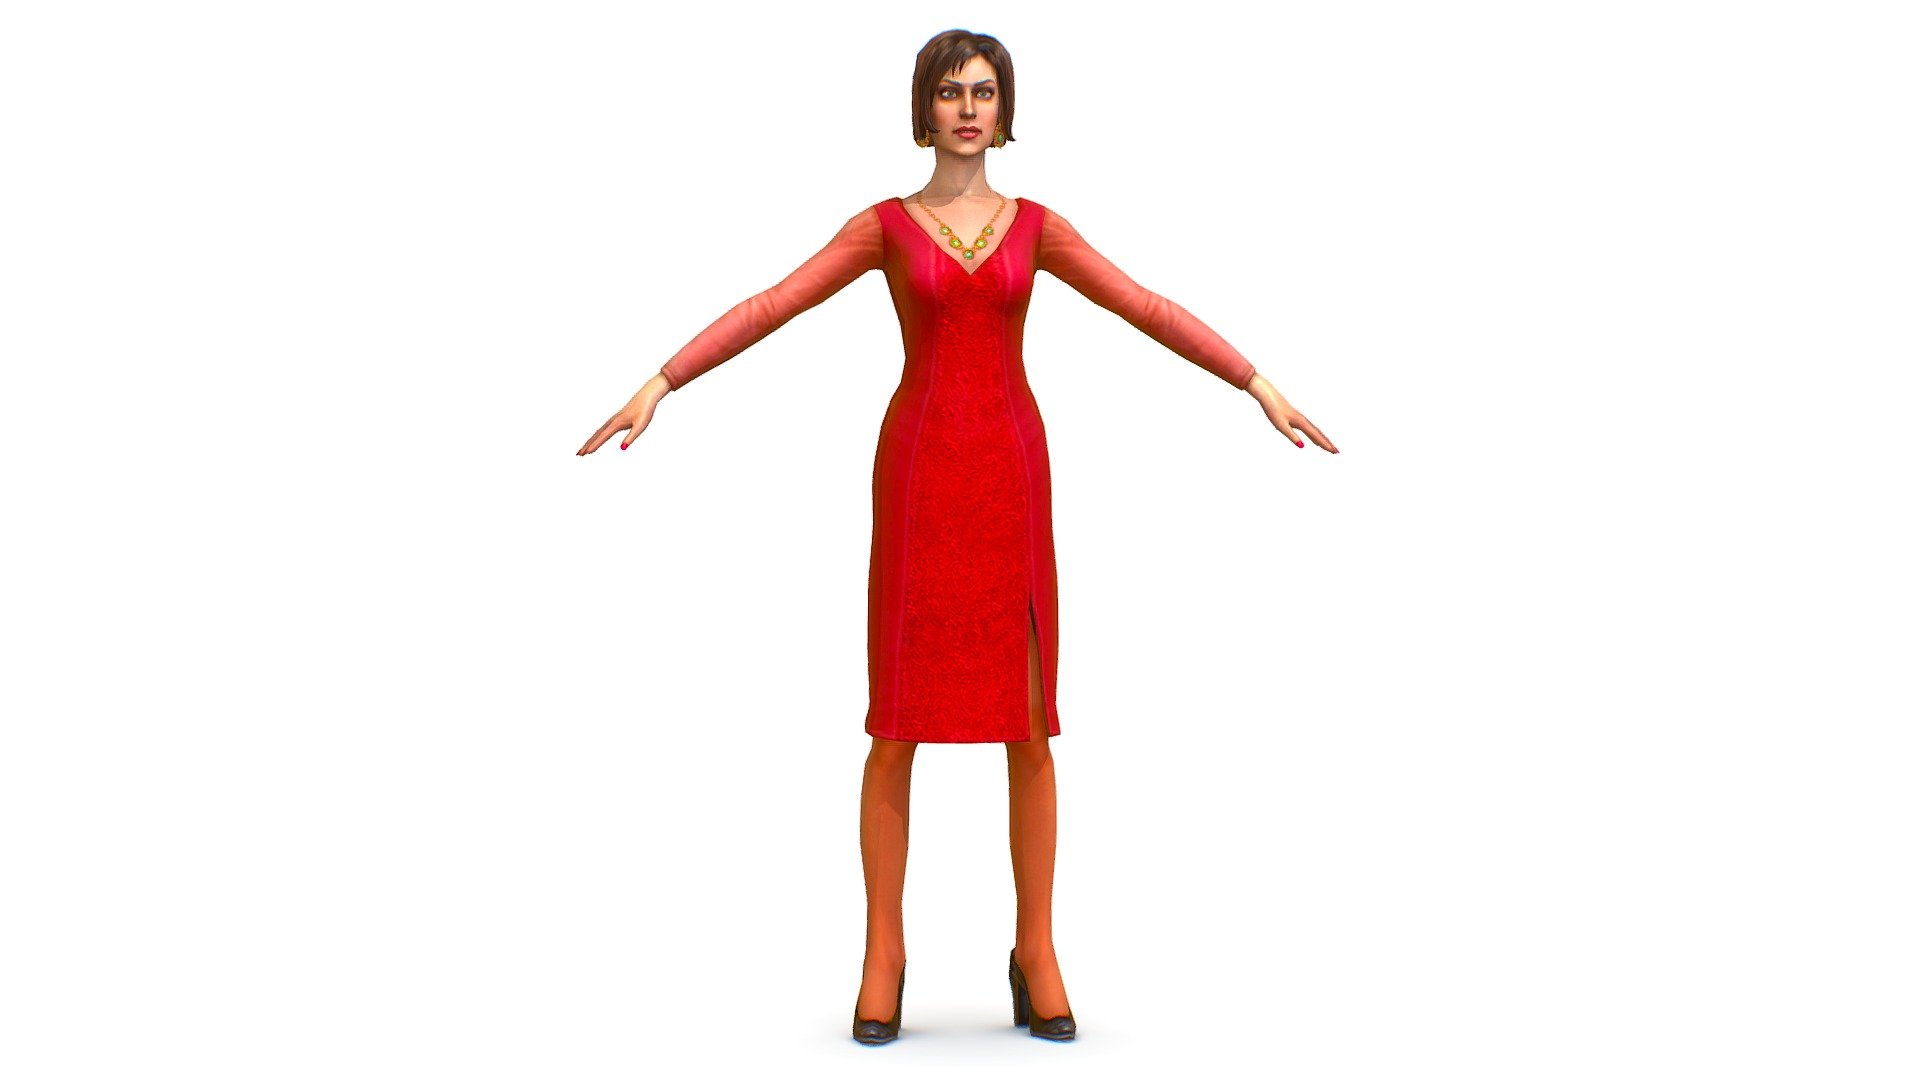 A young girl in a red evening dress - 3dsMax file included/ texture 512 color only, head and body 3d model